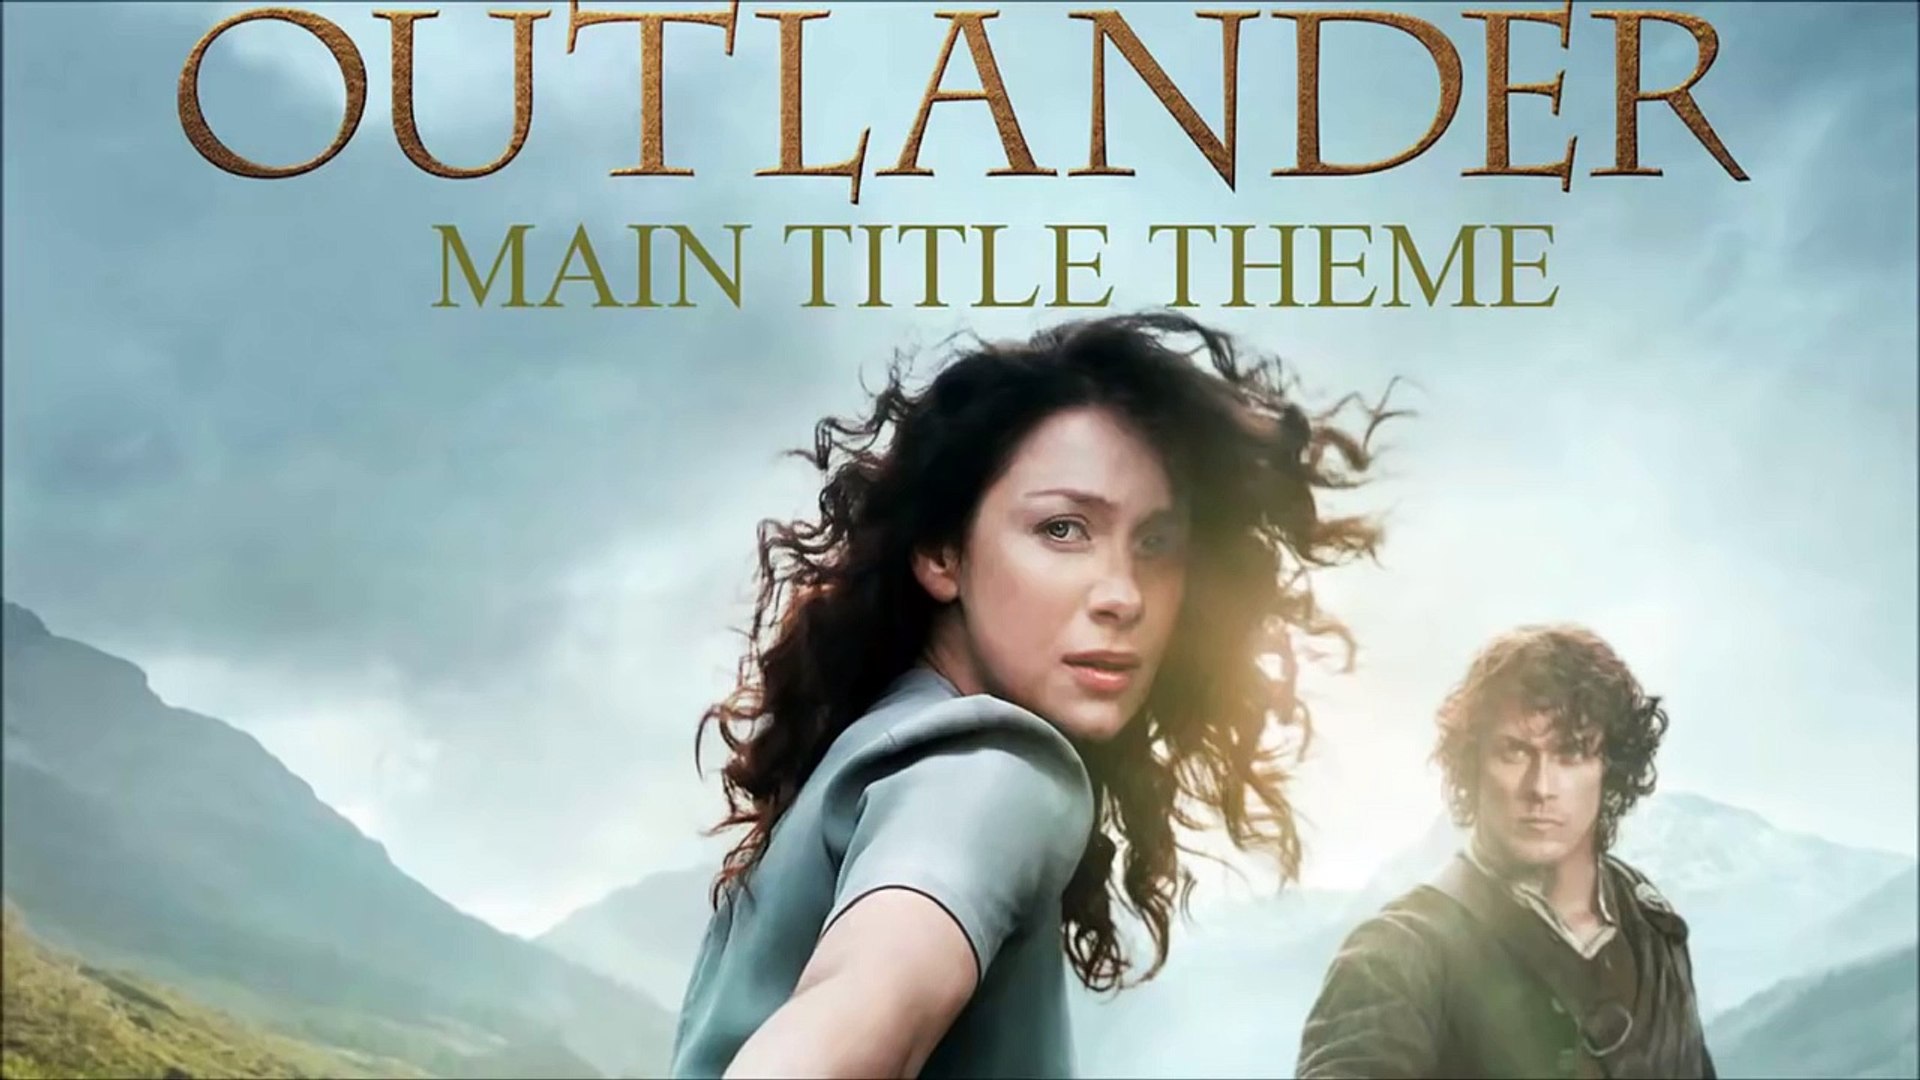 Bear McCreary - Outlander - The Skye Boat Song (After Culloden